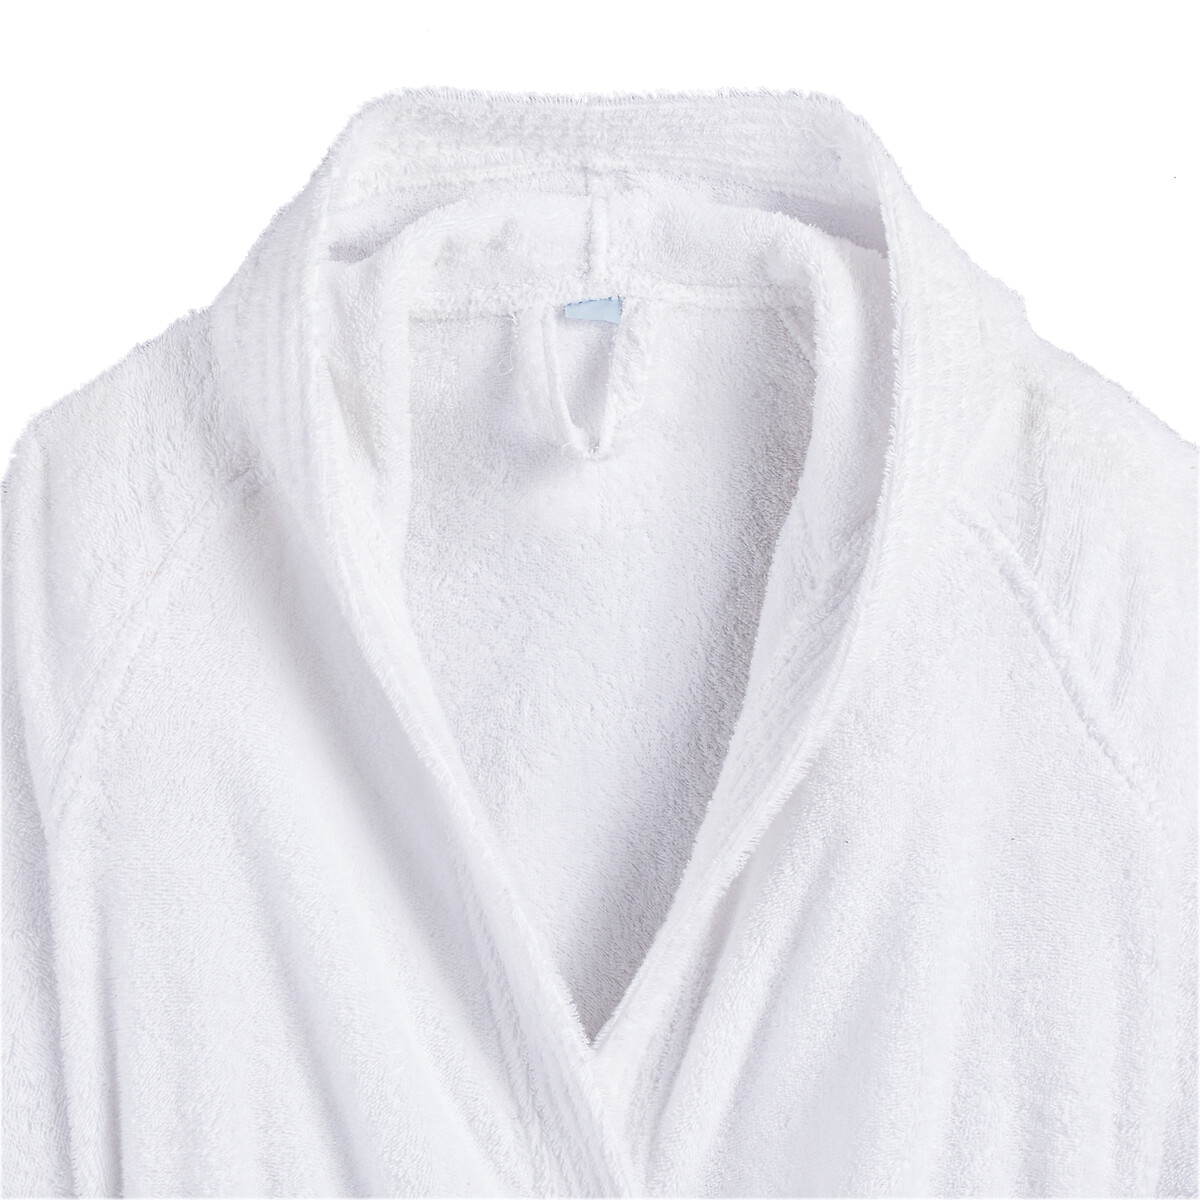 Amazon.com: Bathrobe for Women Terry Cloth，Dressing Gowns for Fluffy Hotel  Soft Bathrobes Cotton Nightgown (Color : White, Size : M) : Everything Else